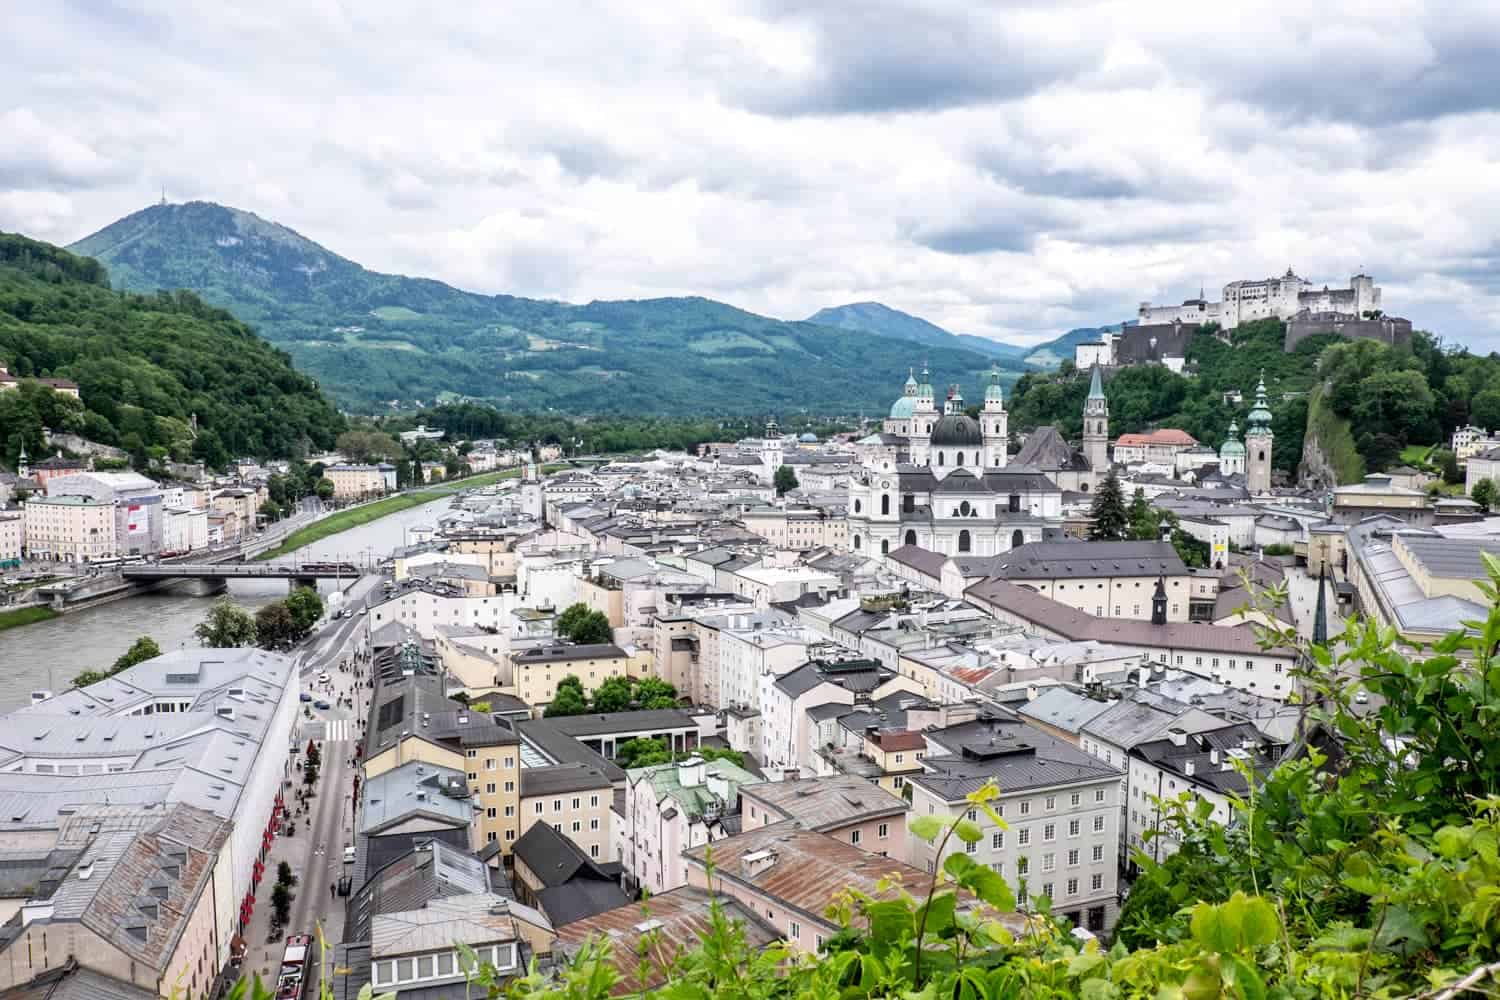 Elevated view of Salzburg - an old riverside town with a castle on the hill backed by forested mountains. 